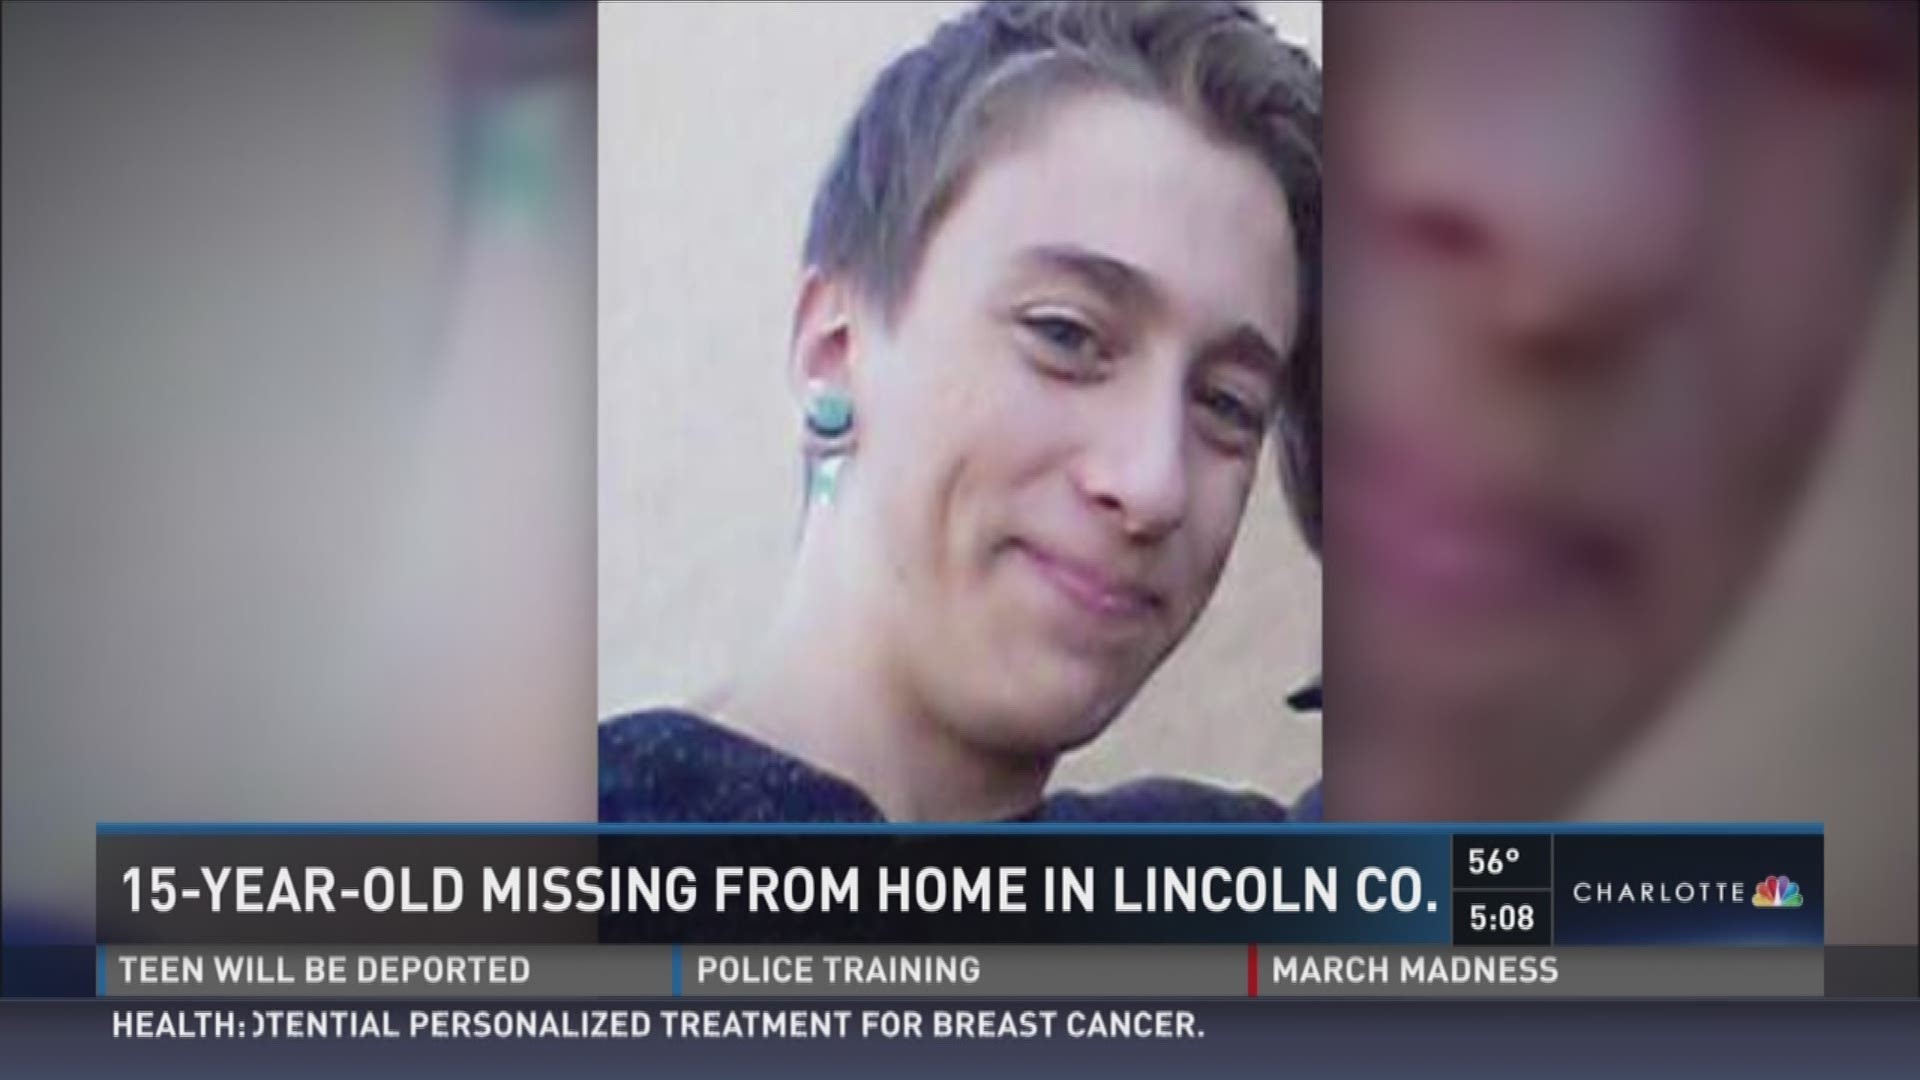 Deputies in Lincoln County are asking for the public's help in locating a missing teenager.